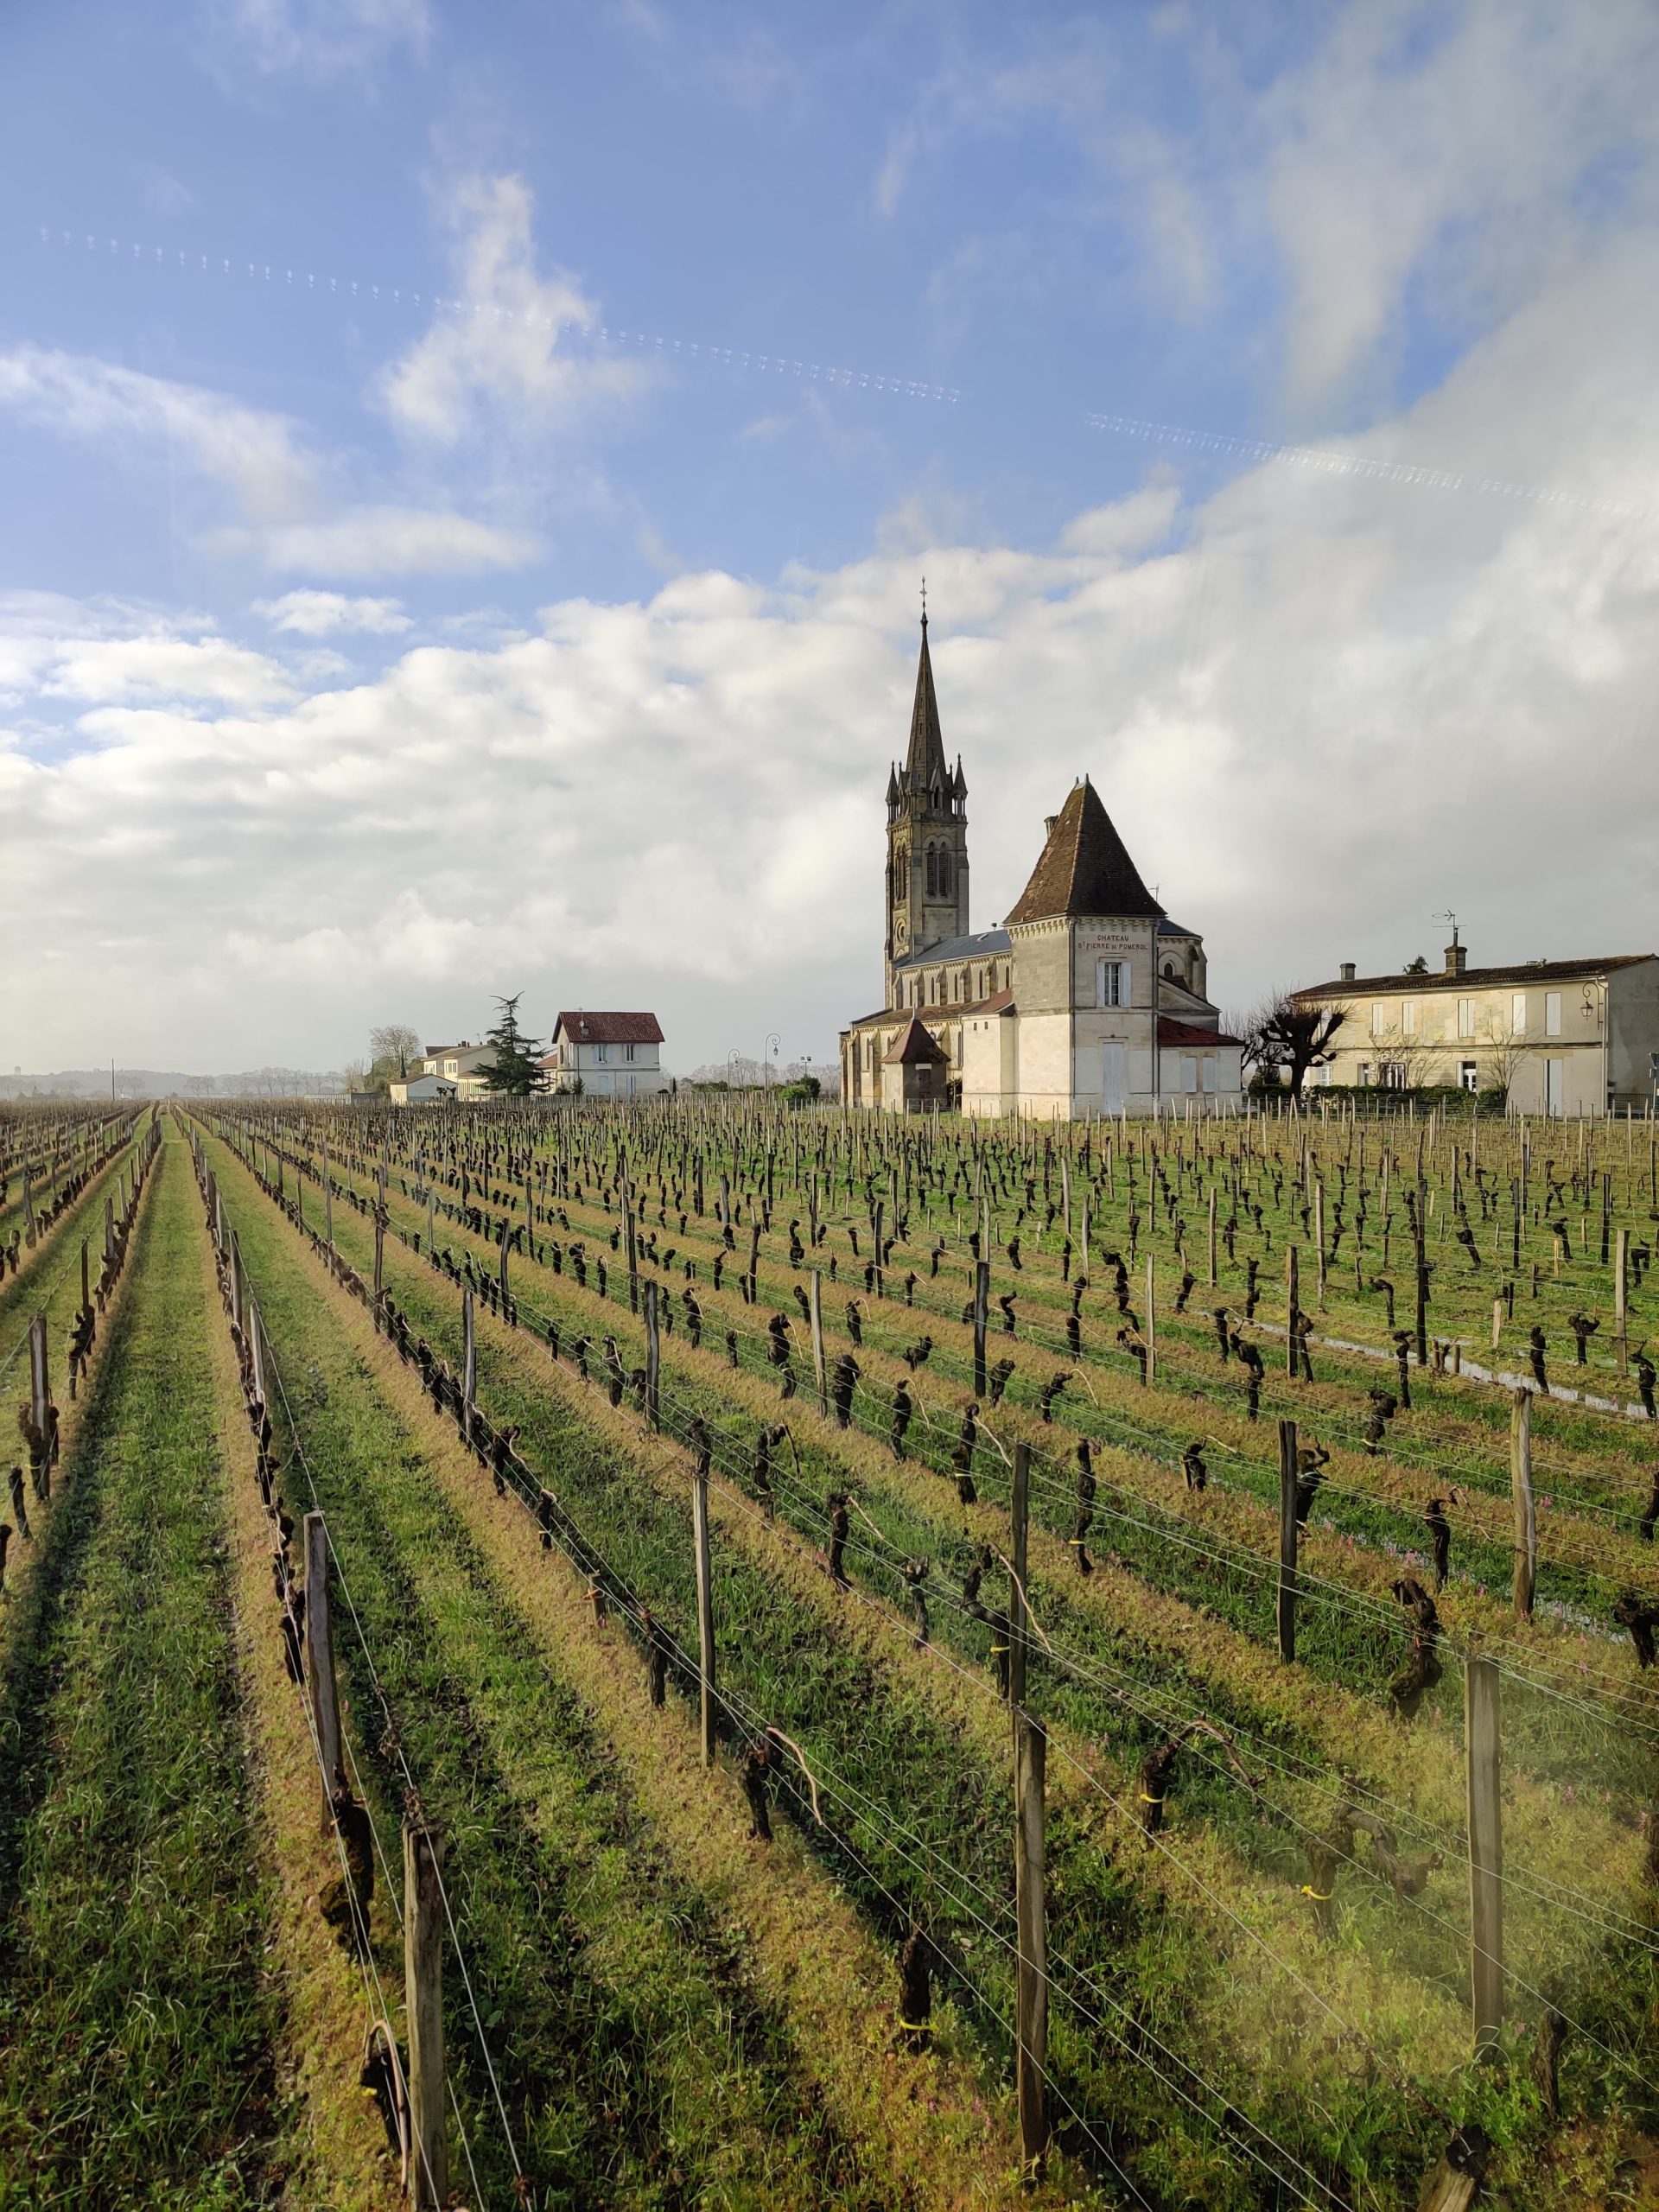 Bordeaux -  A “Must” For Wine Lovers